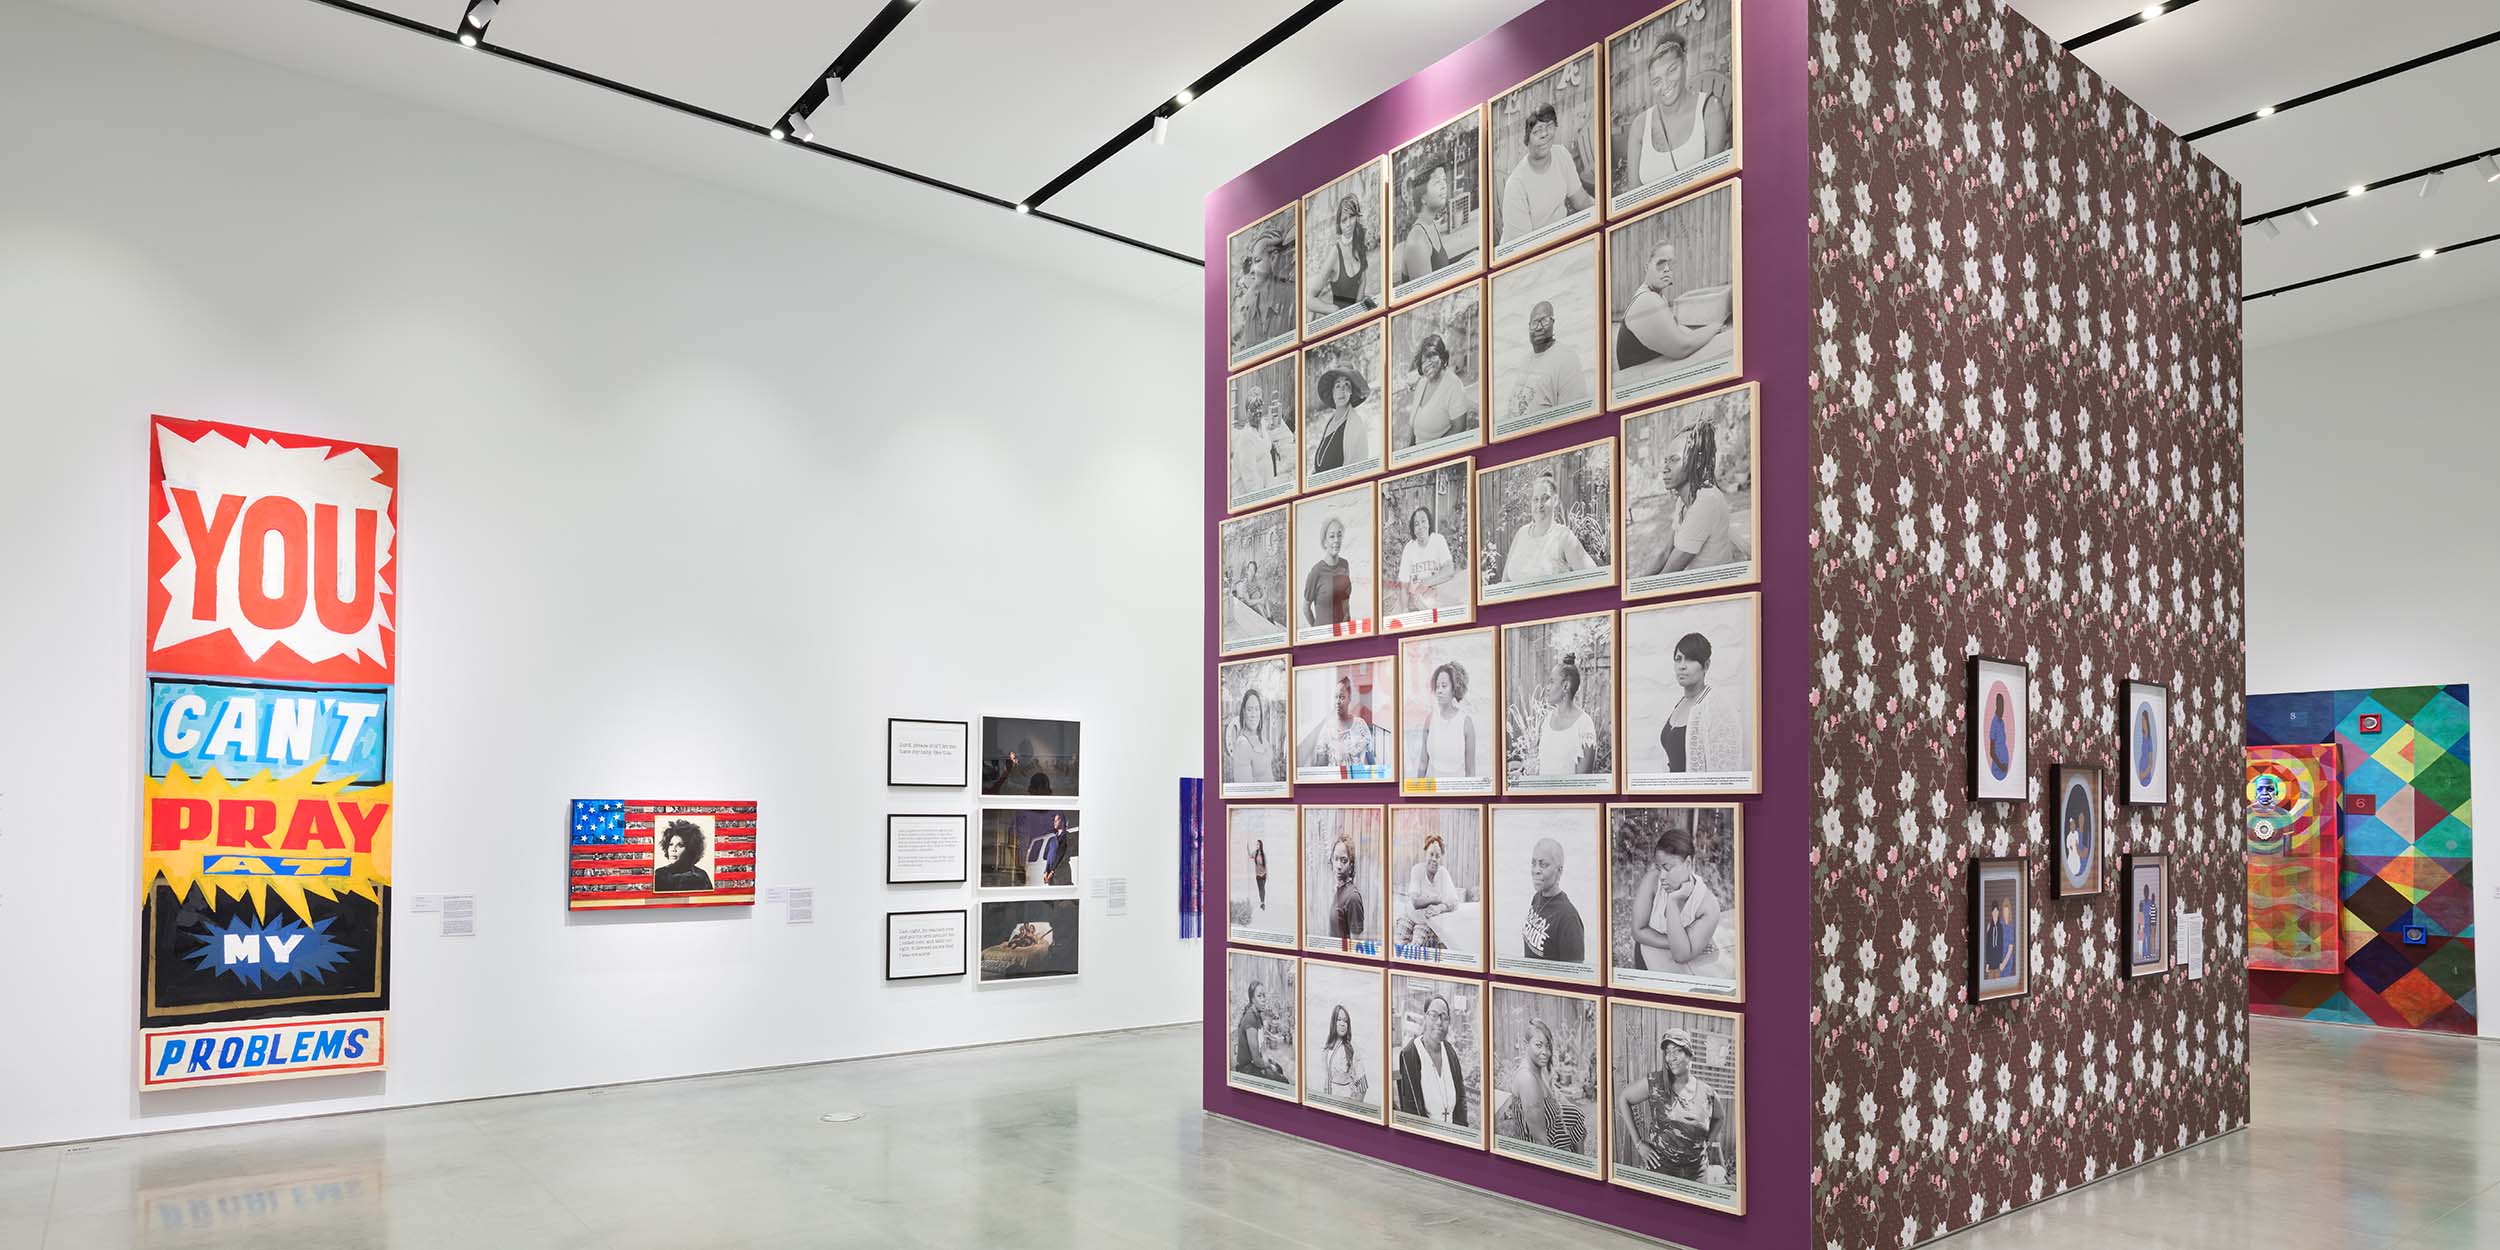 In a bright white gallery, a purple ceiling height structure is hung with a grid of black and white portraits. Around the gallery are colorful paintings and photographs.